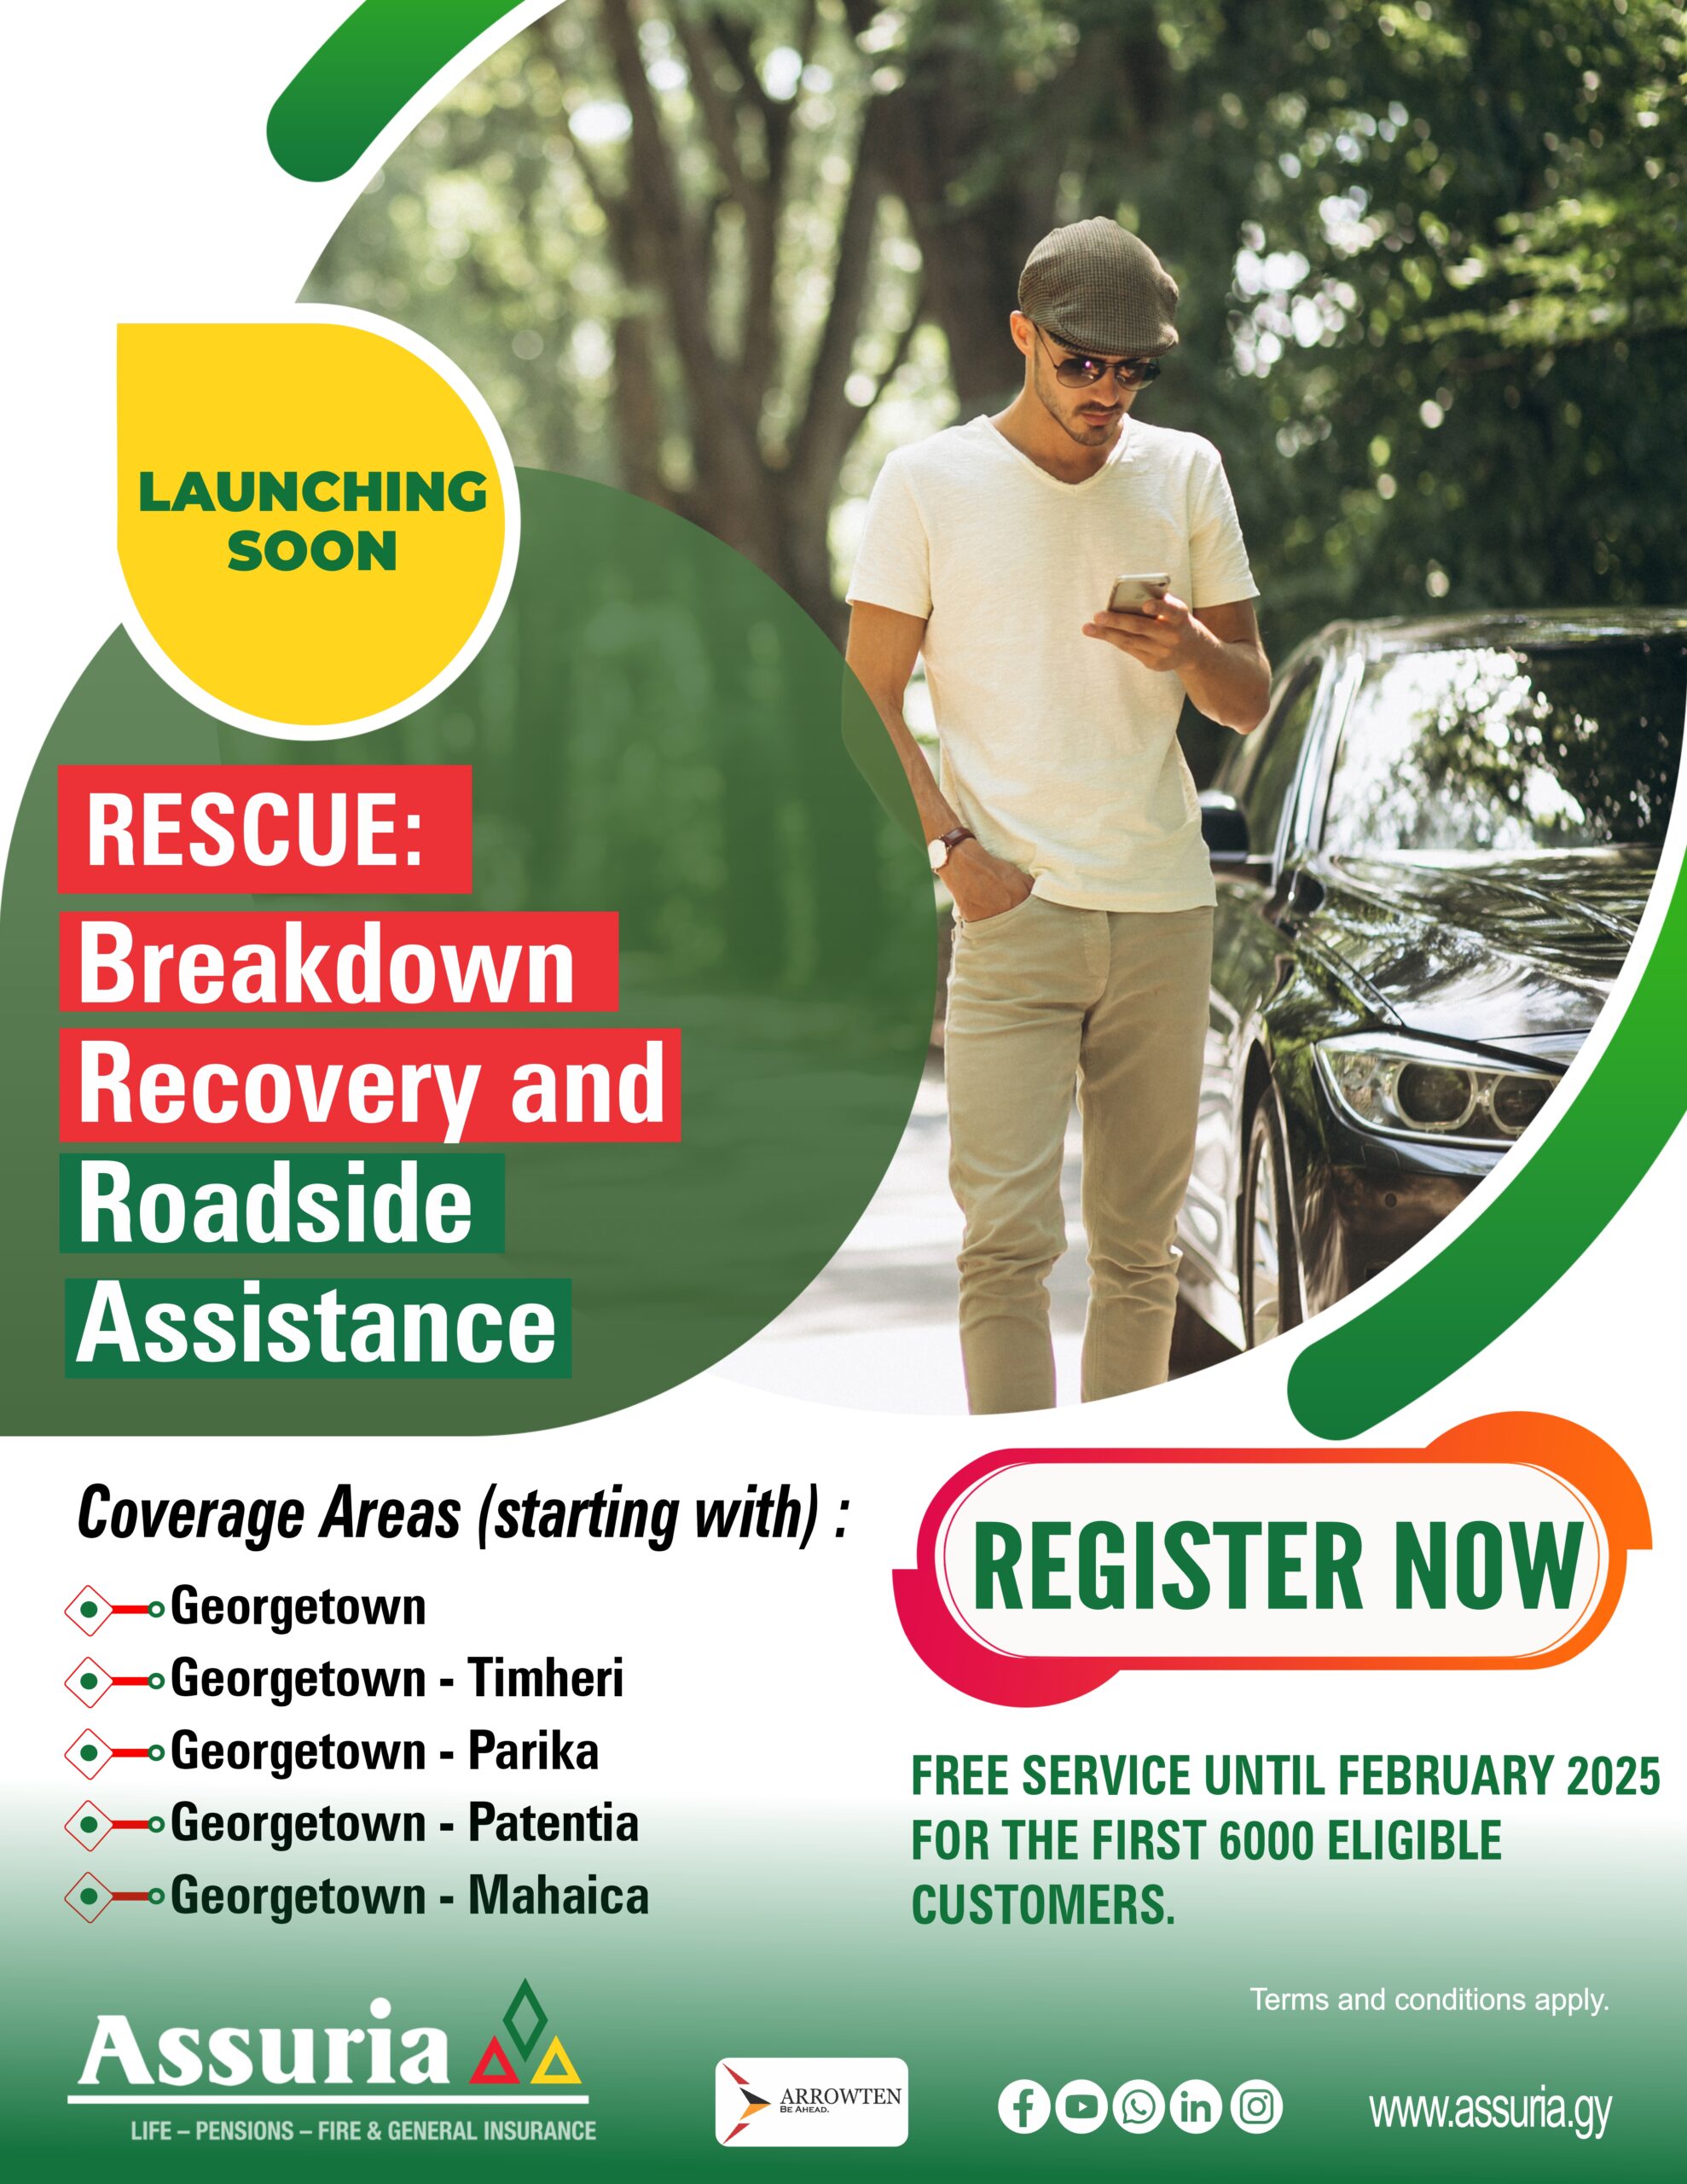 Assuria collaborates with Arrowten Inc to introduce new Breakdown Recovery and Roadside Assistance initiative called “RESCUE”